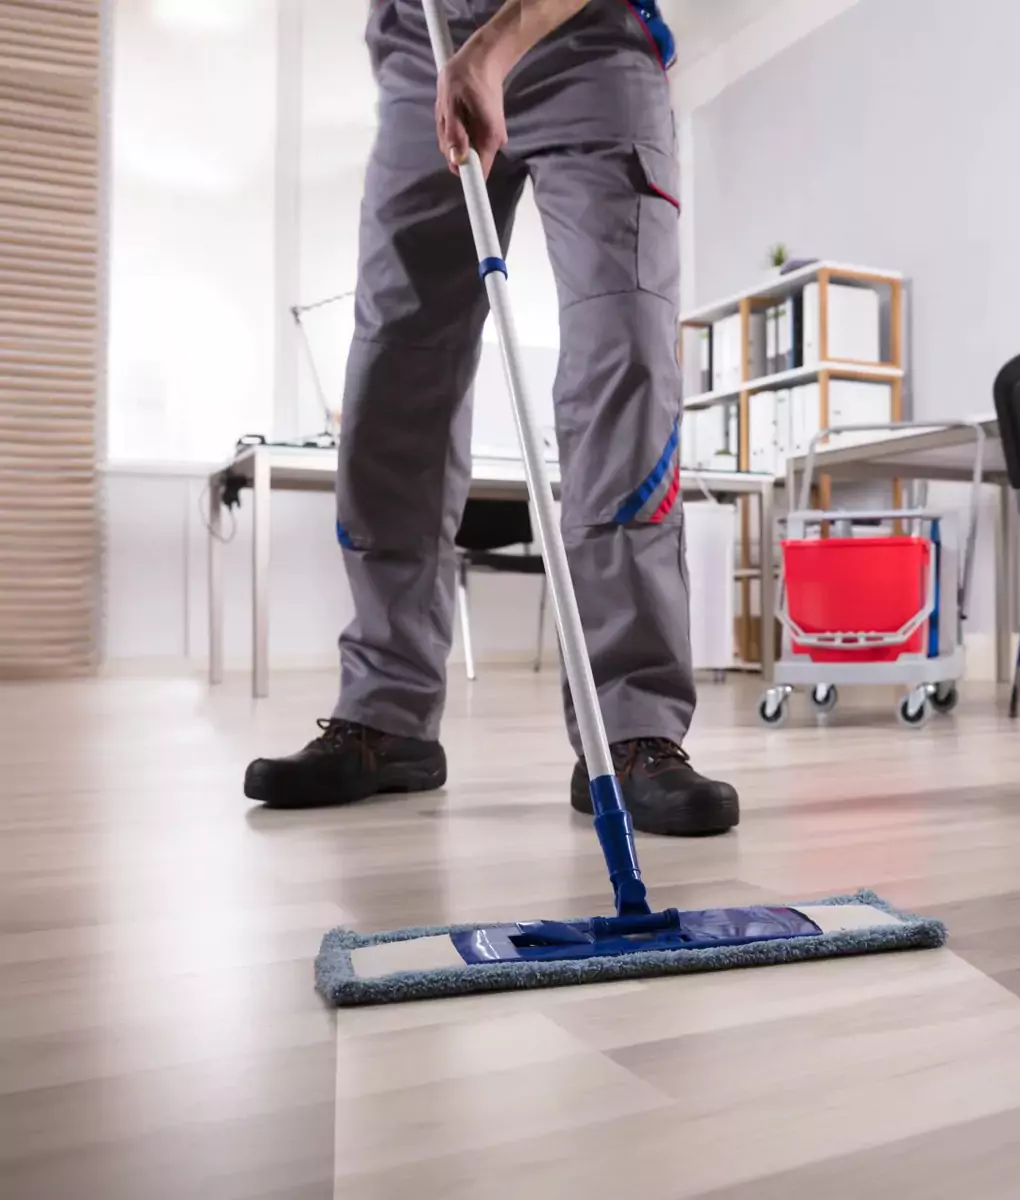 Residential Janitorial Cleaning Services in DE and MD